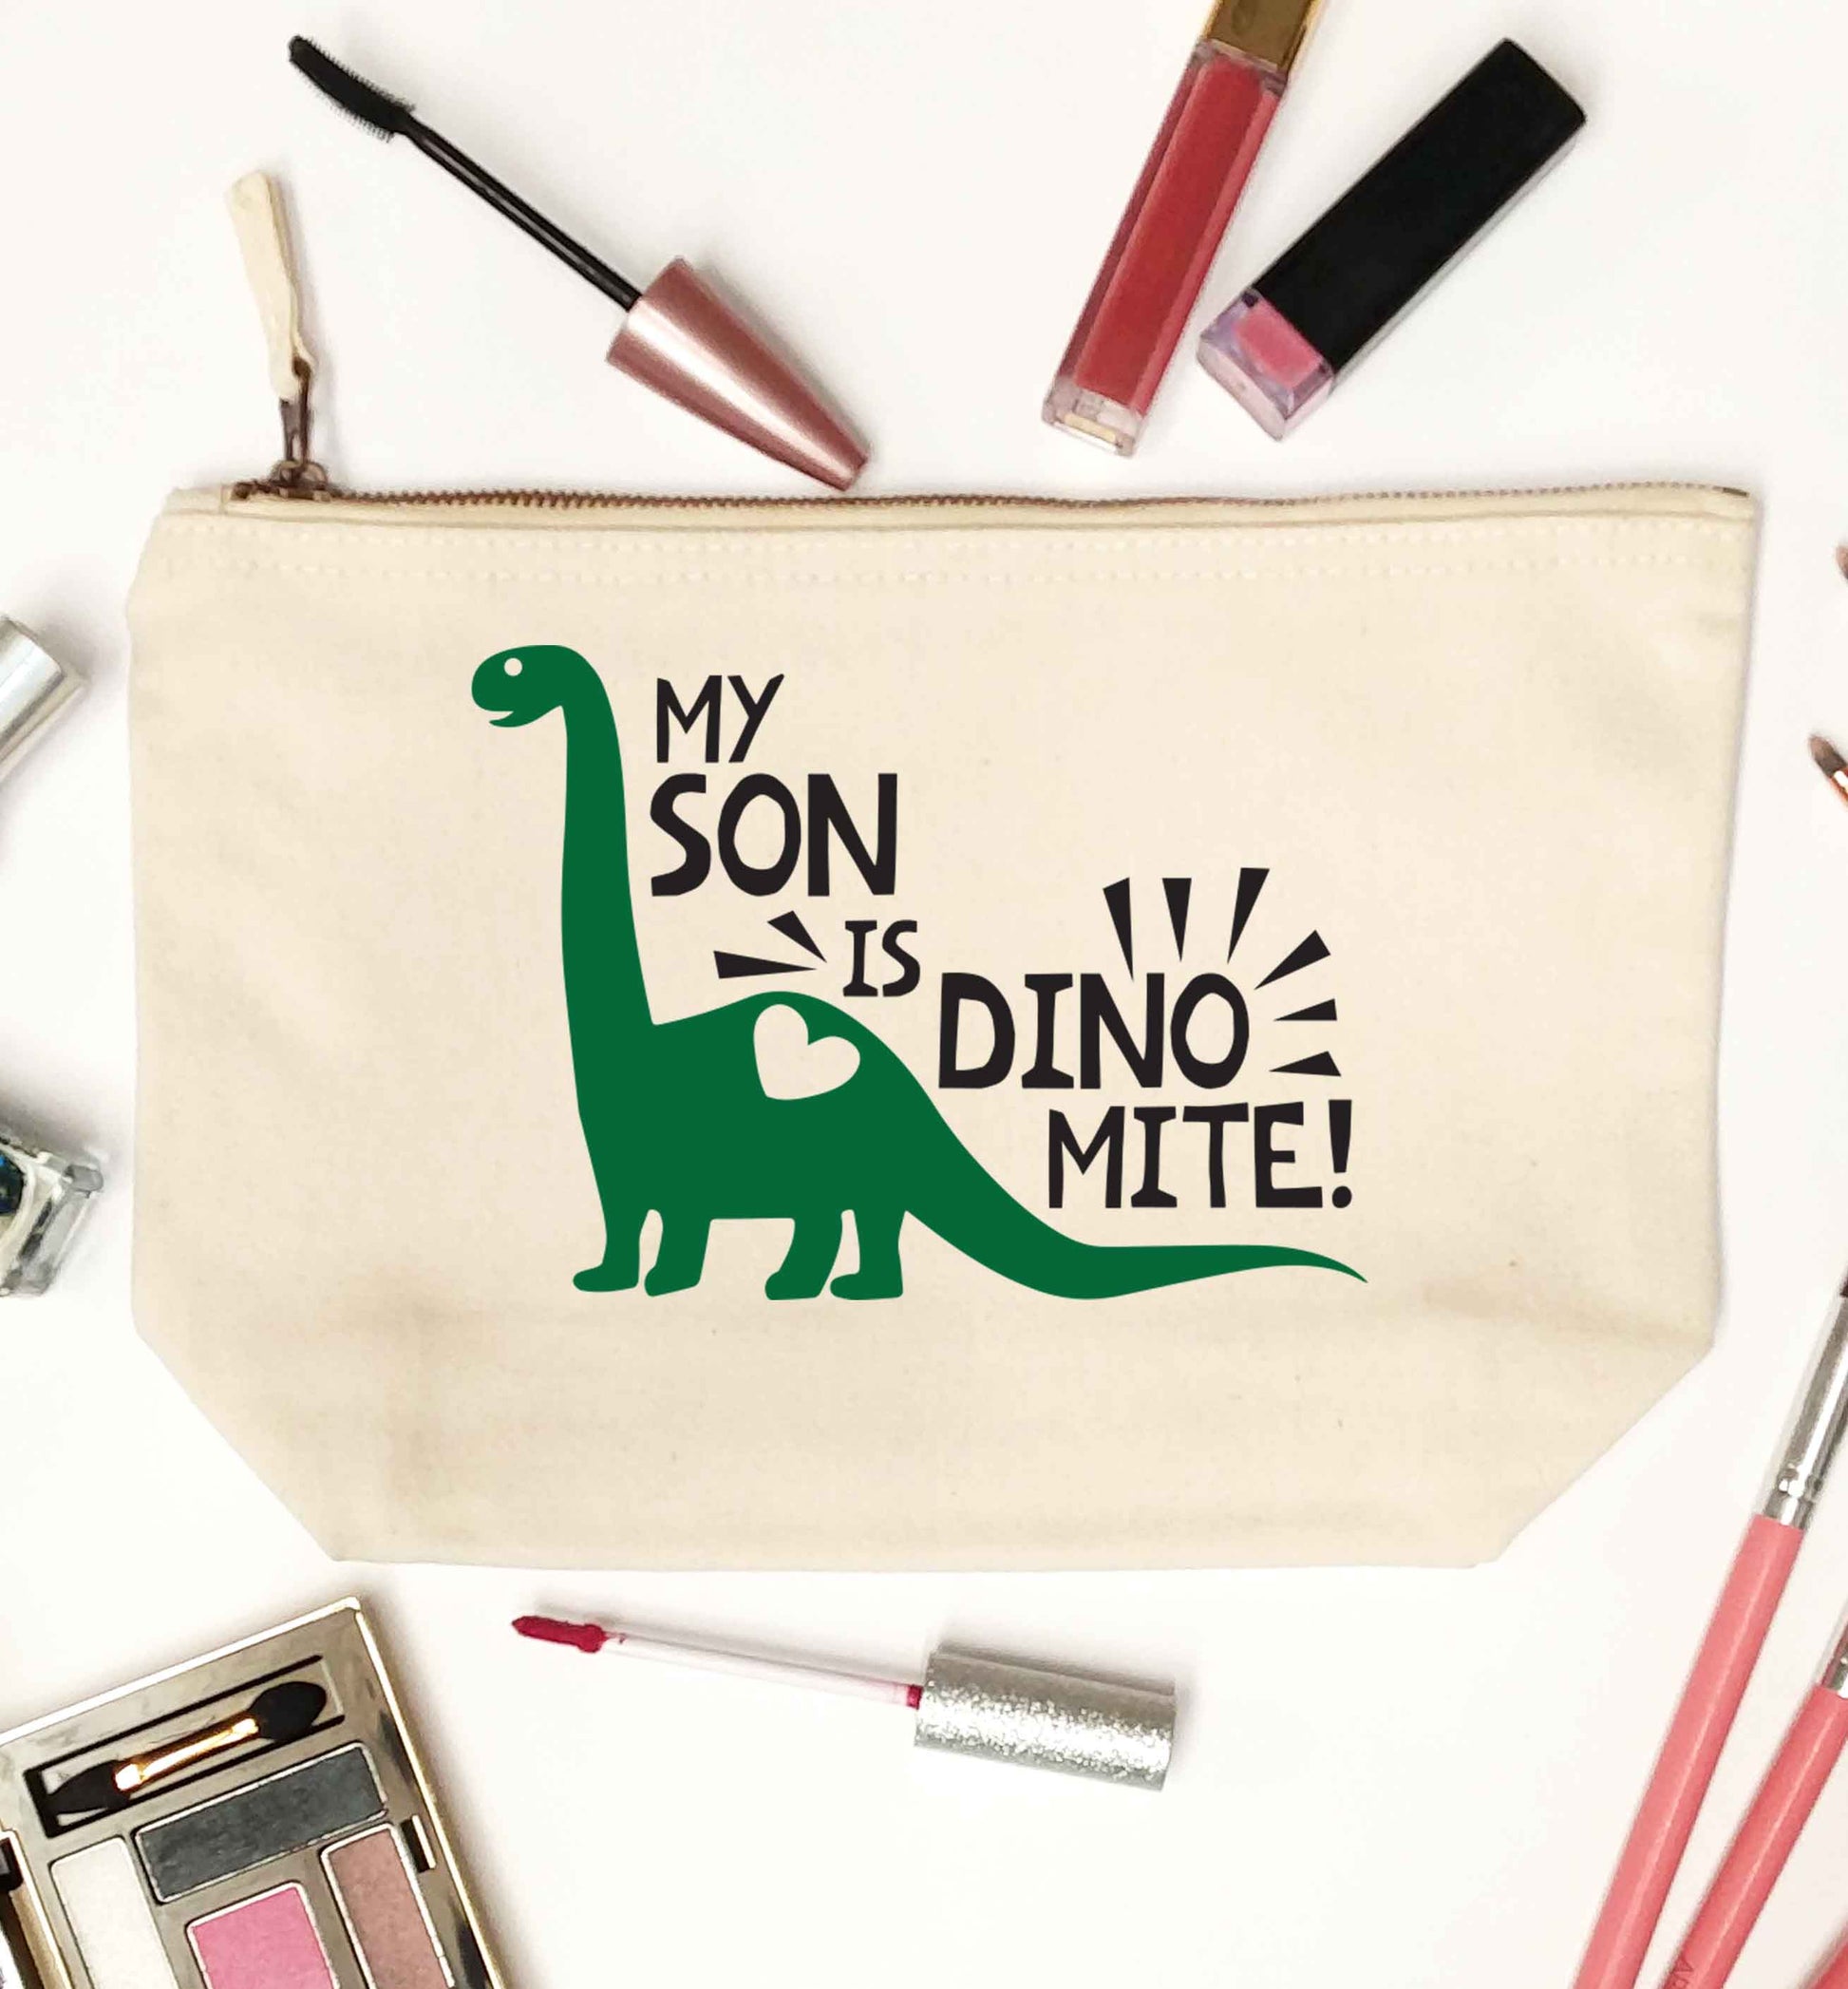 My son is dinomite! natural makeup bag